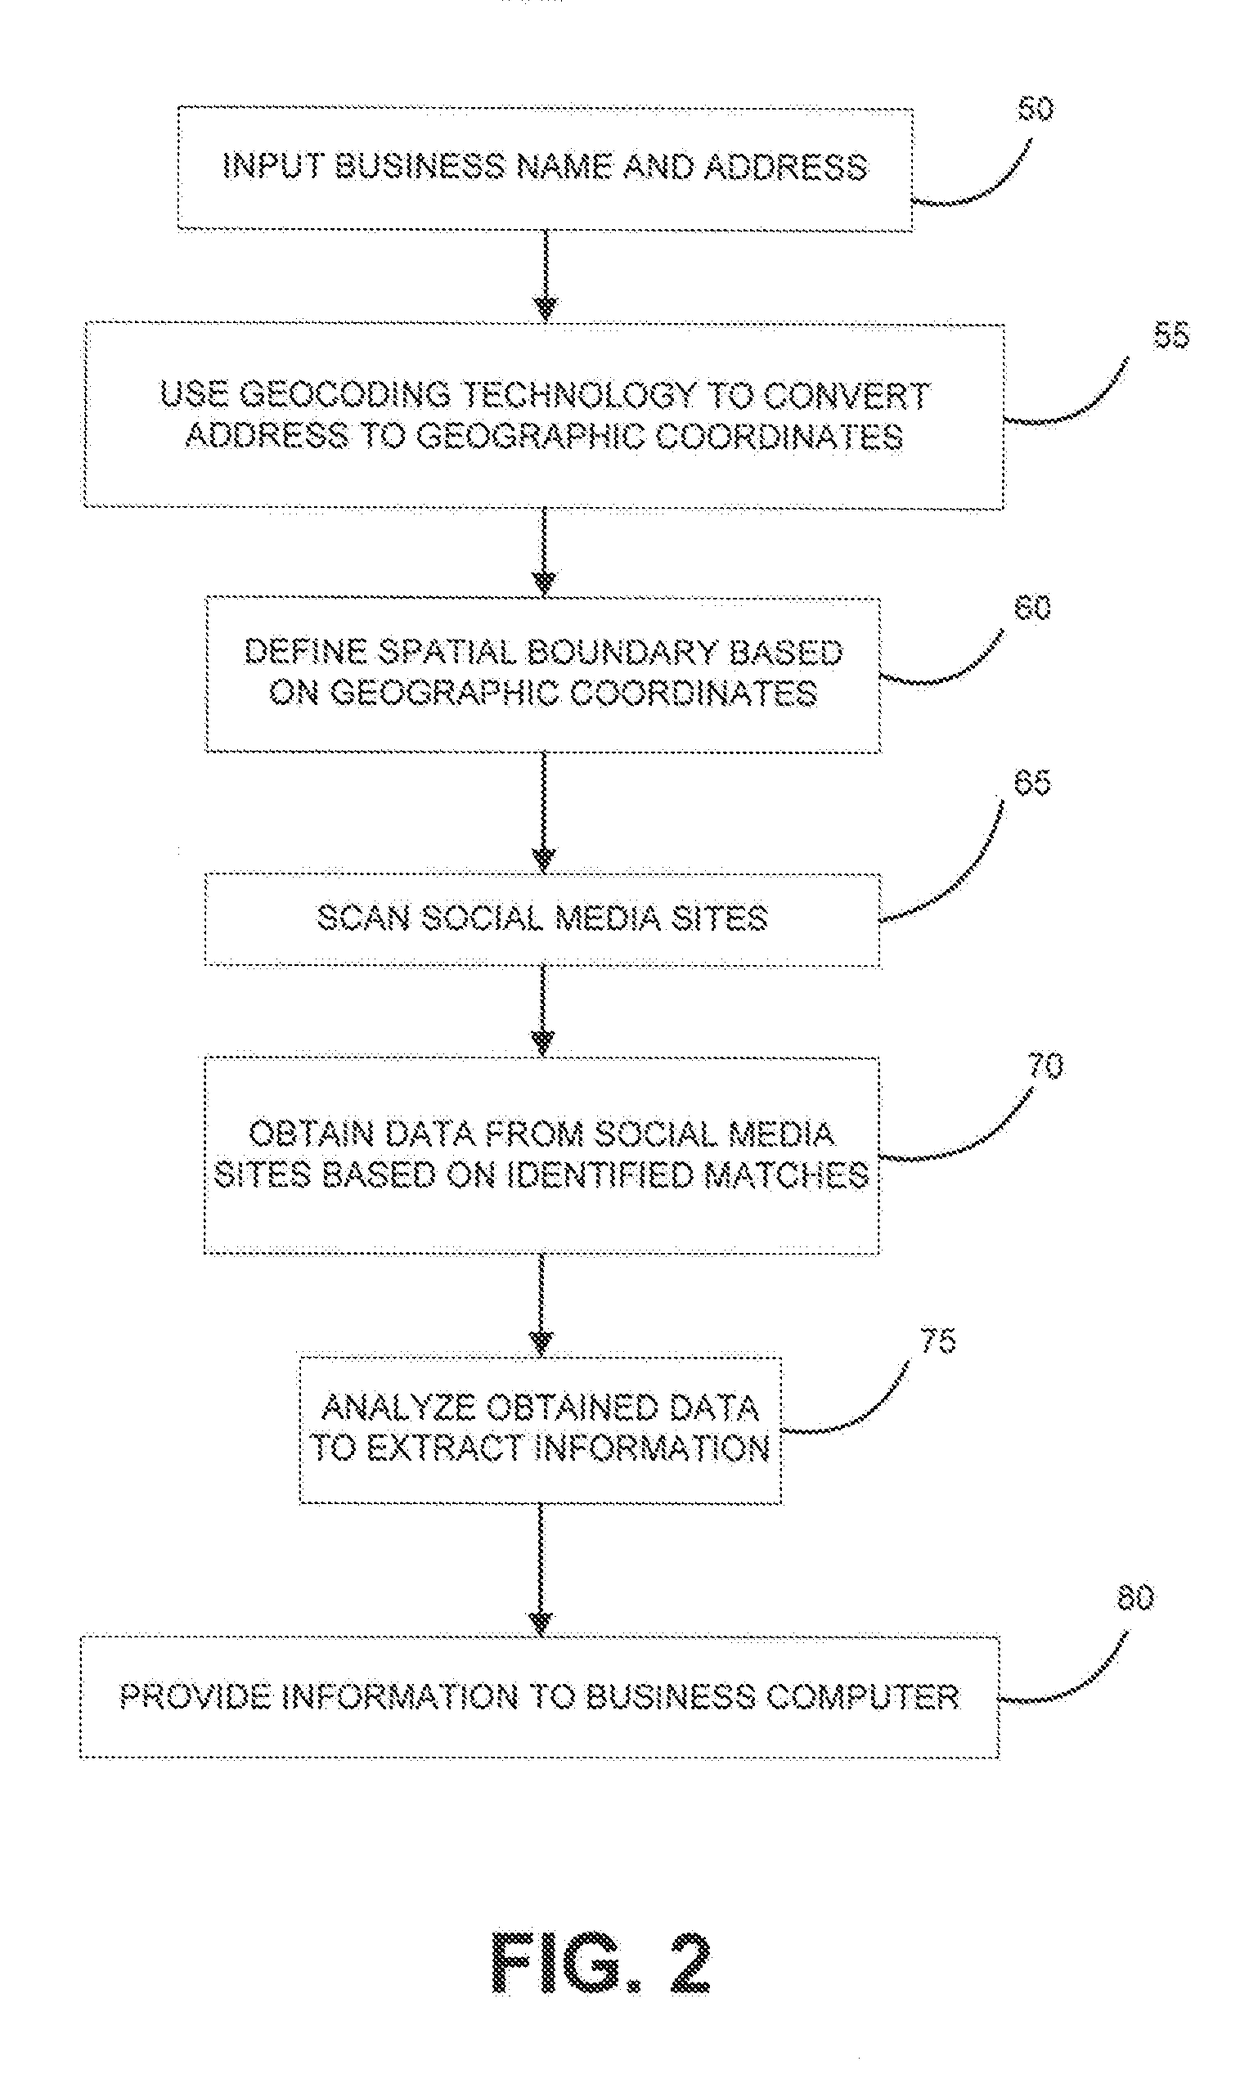 Identifying business online social presence with name and address using spatial filters